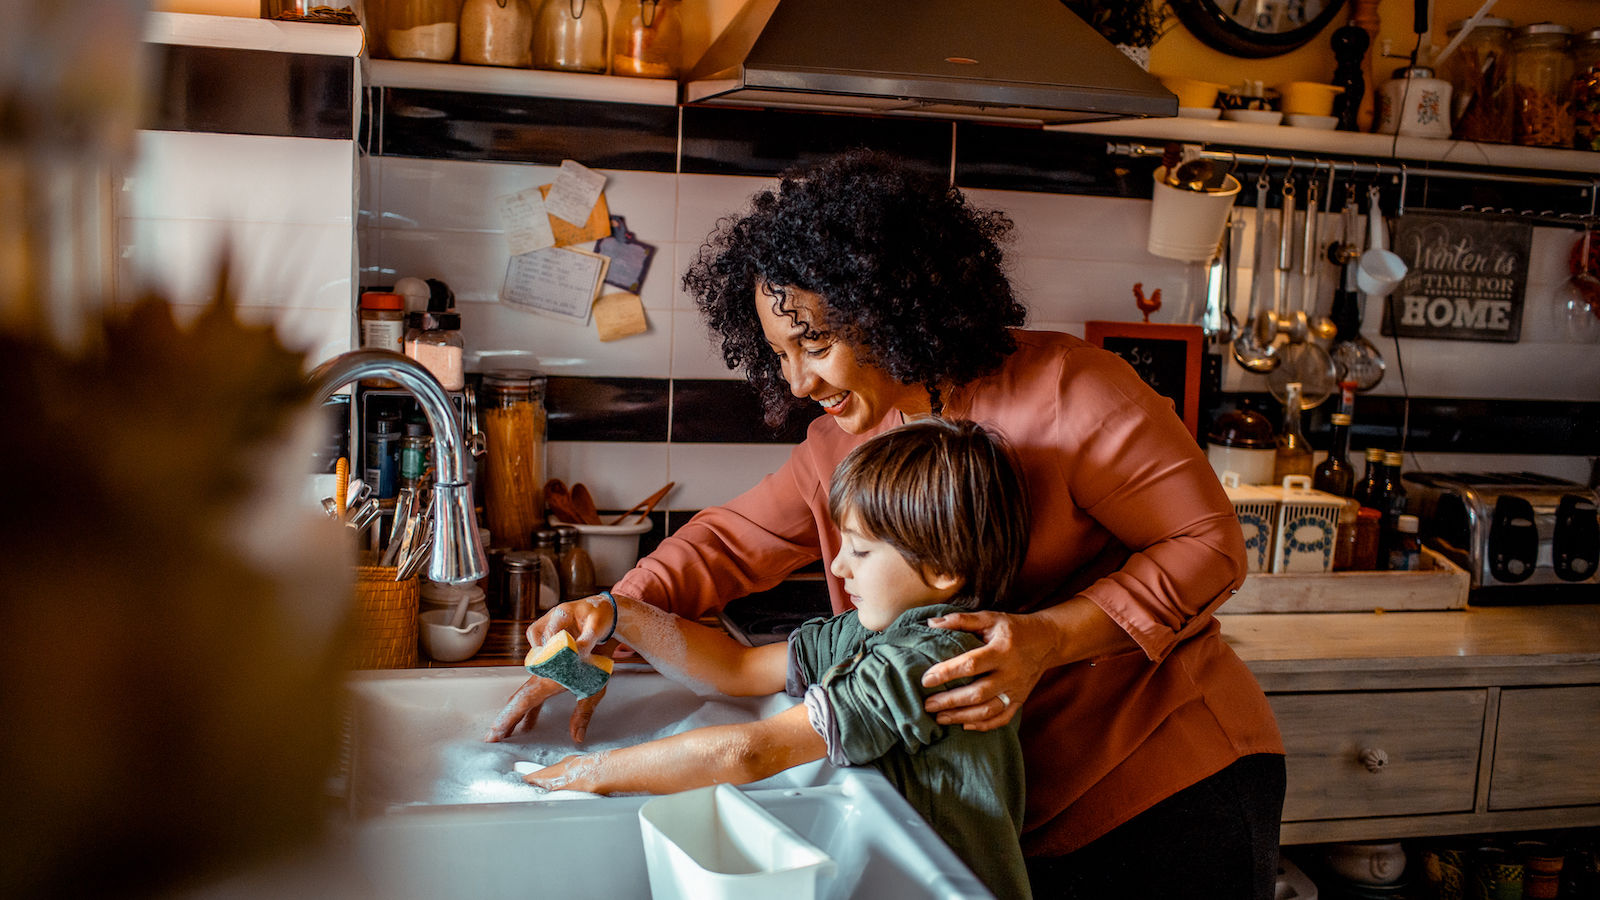 A woman teaches her son to wash dishes with a sponge in the kitchen sink. 